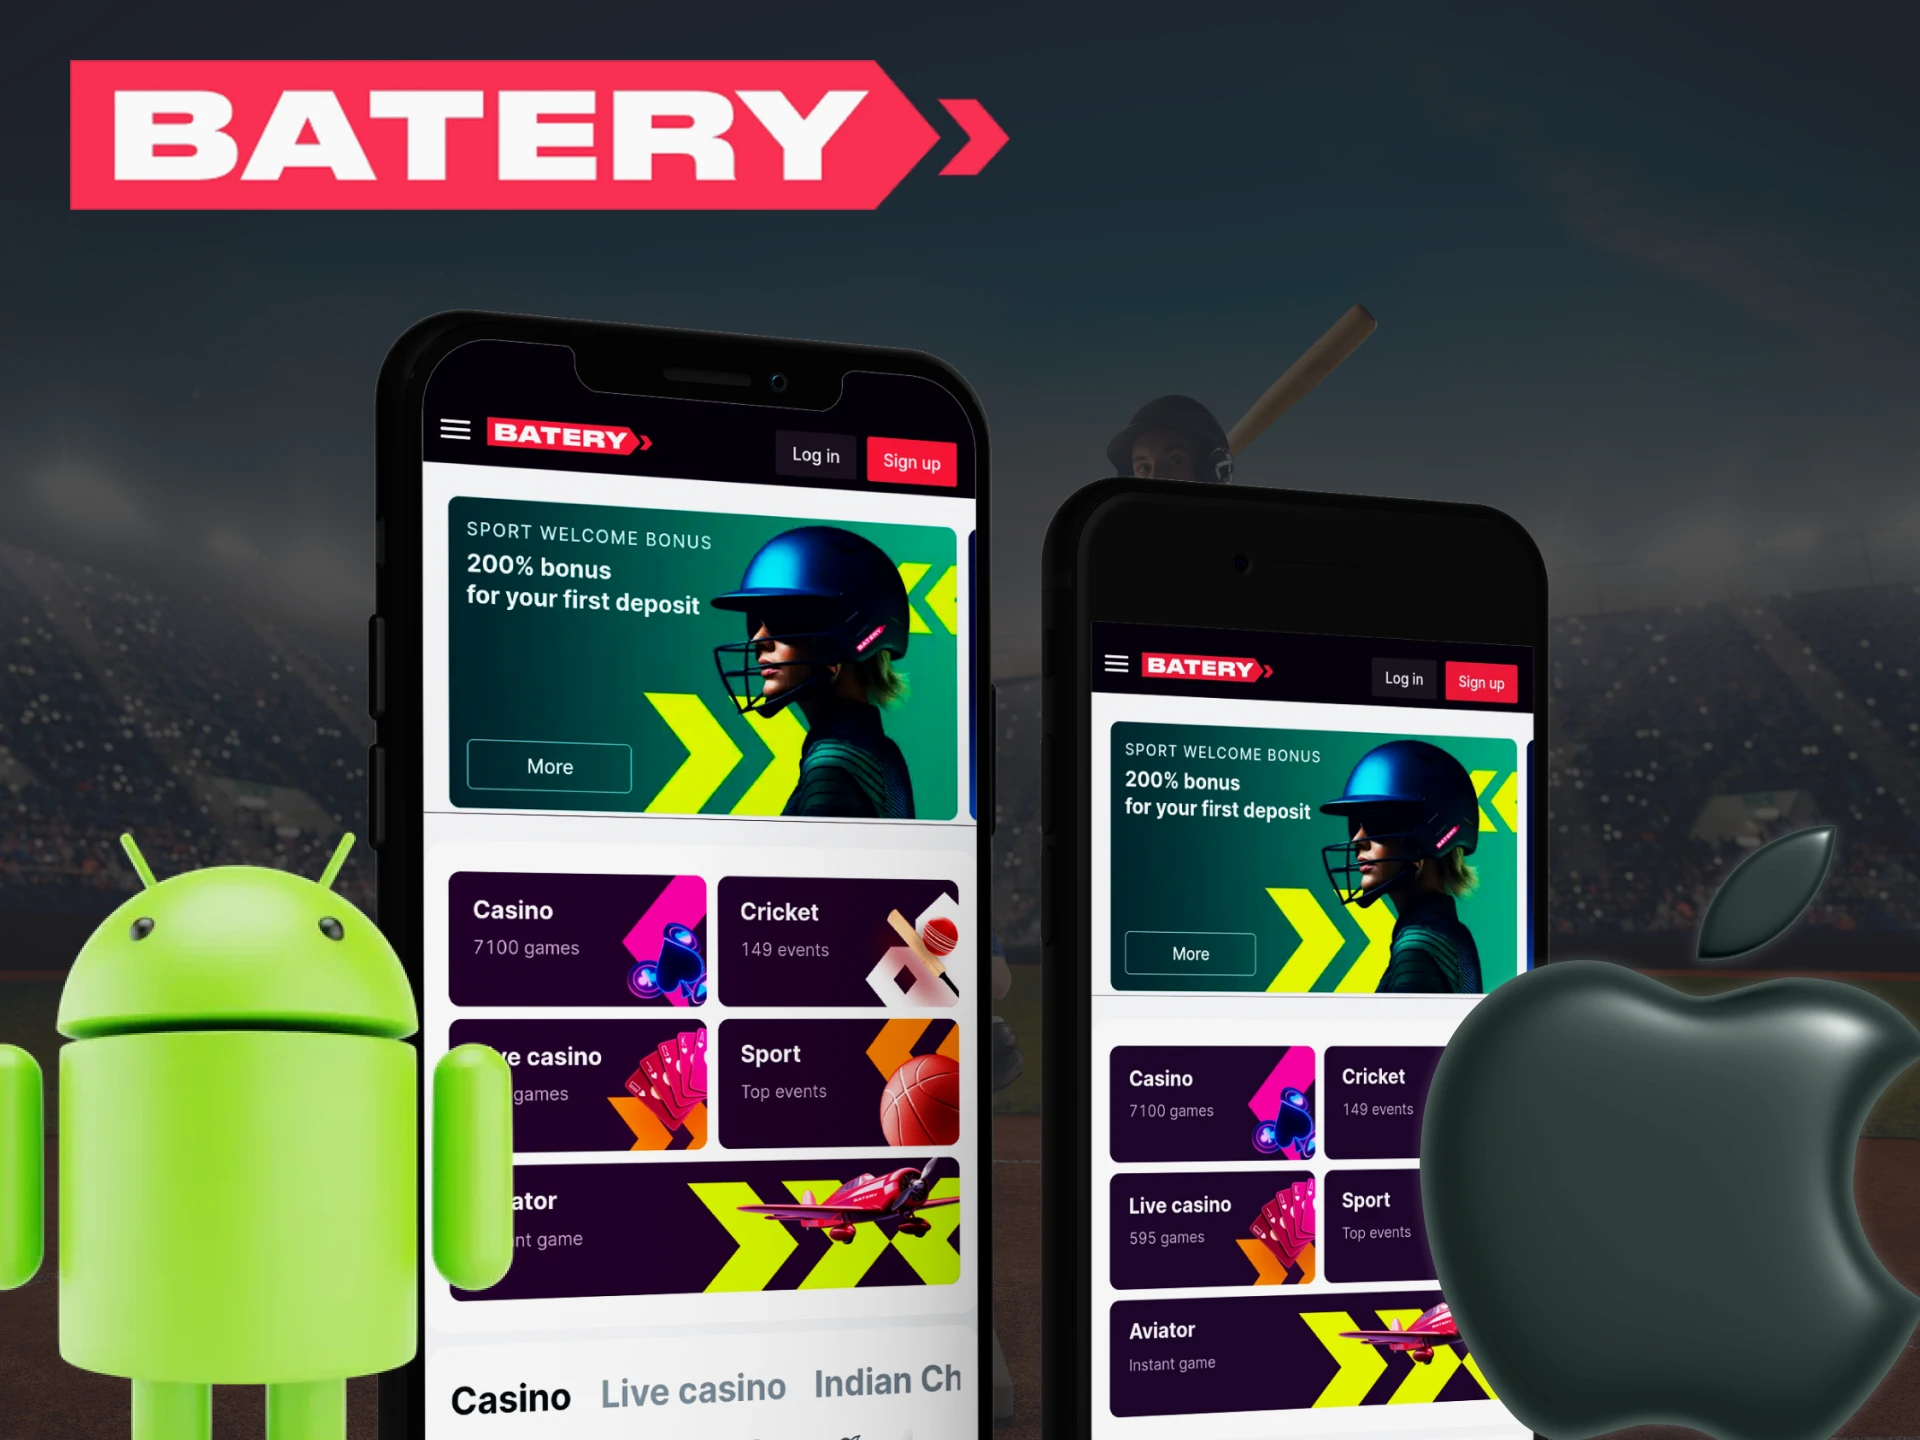 Place your bets with Batery wherever you are using their mobile app for iOS and Android.